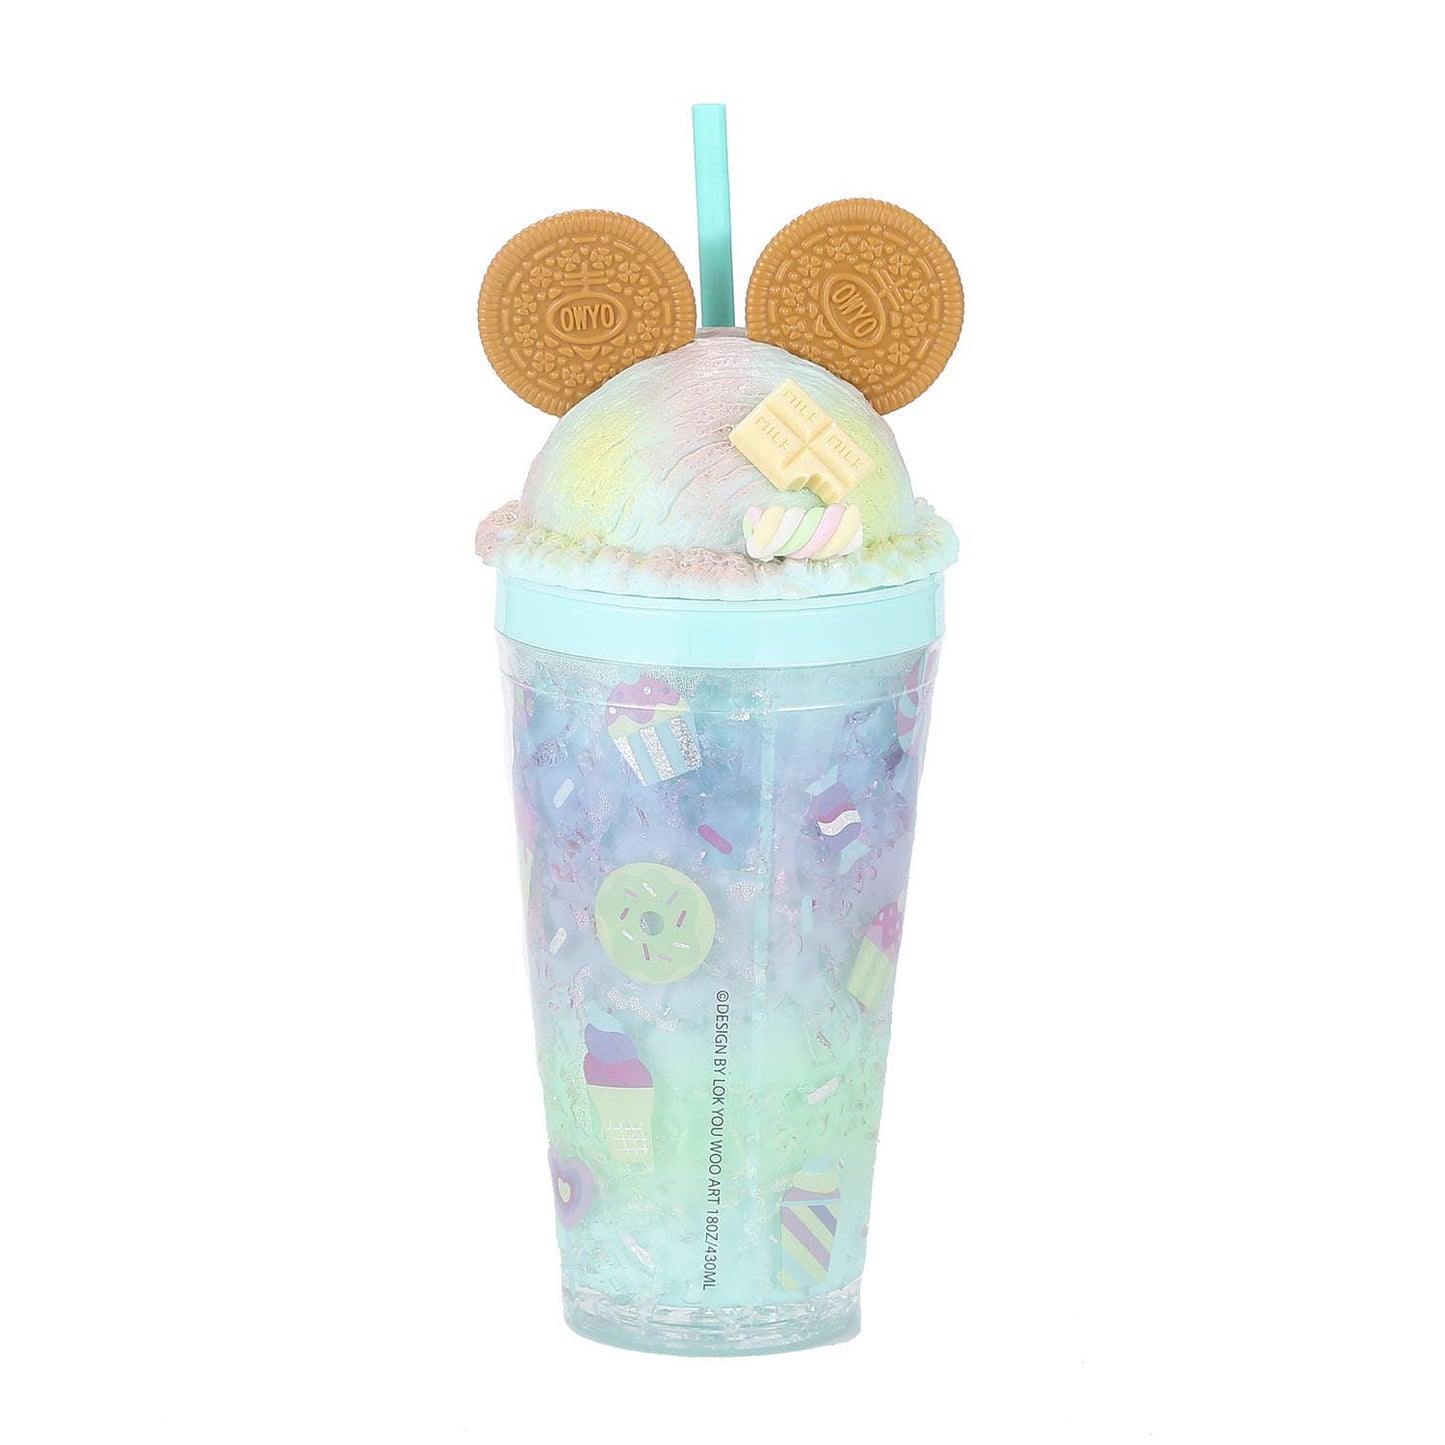 Cookie Mouse Ear Sweets Rainbow Tumbler - 16 Oz